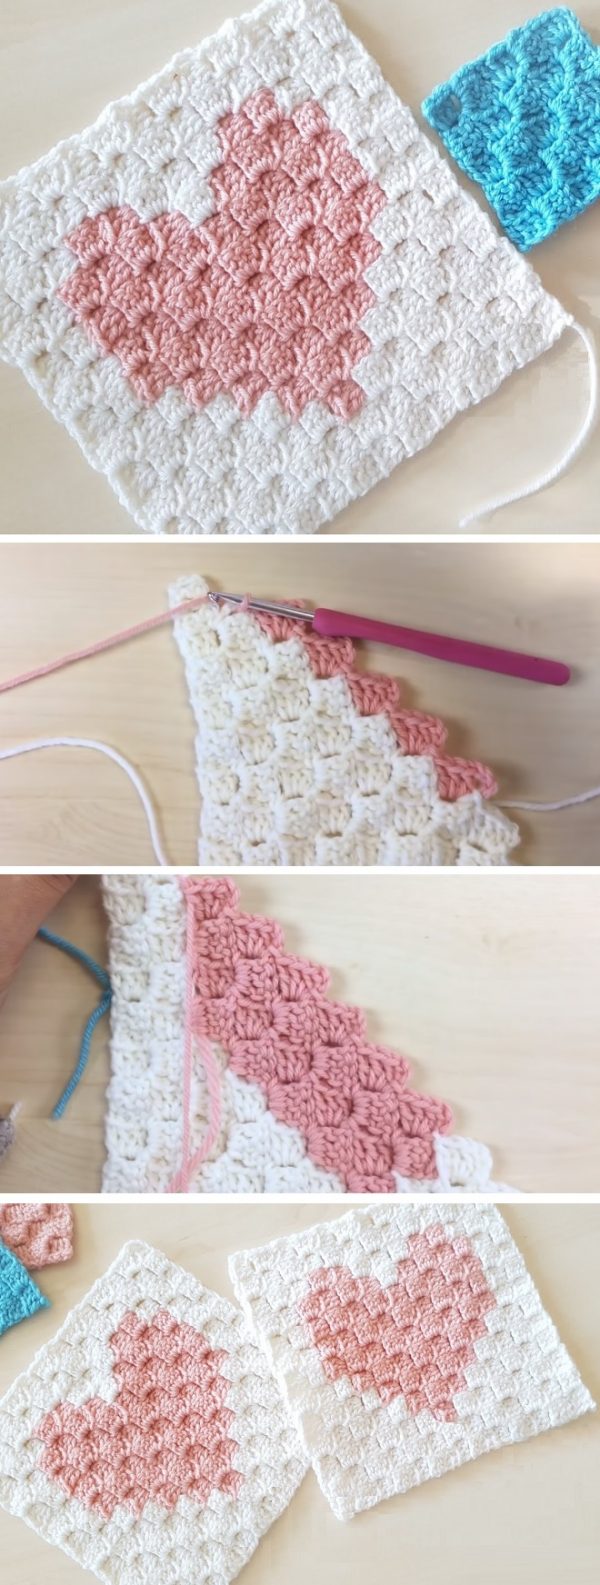 Crochet Heart In A Square Tutorials And More 5828